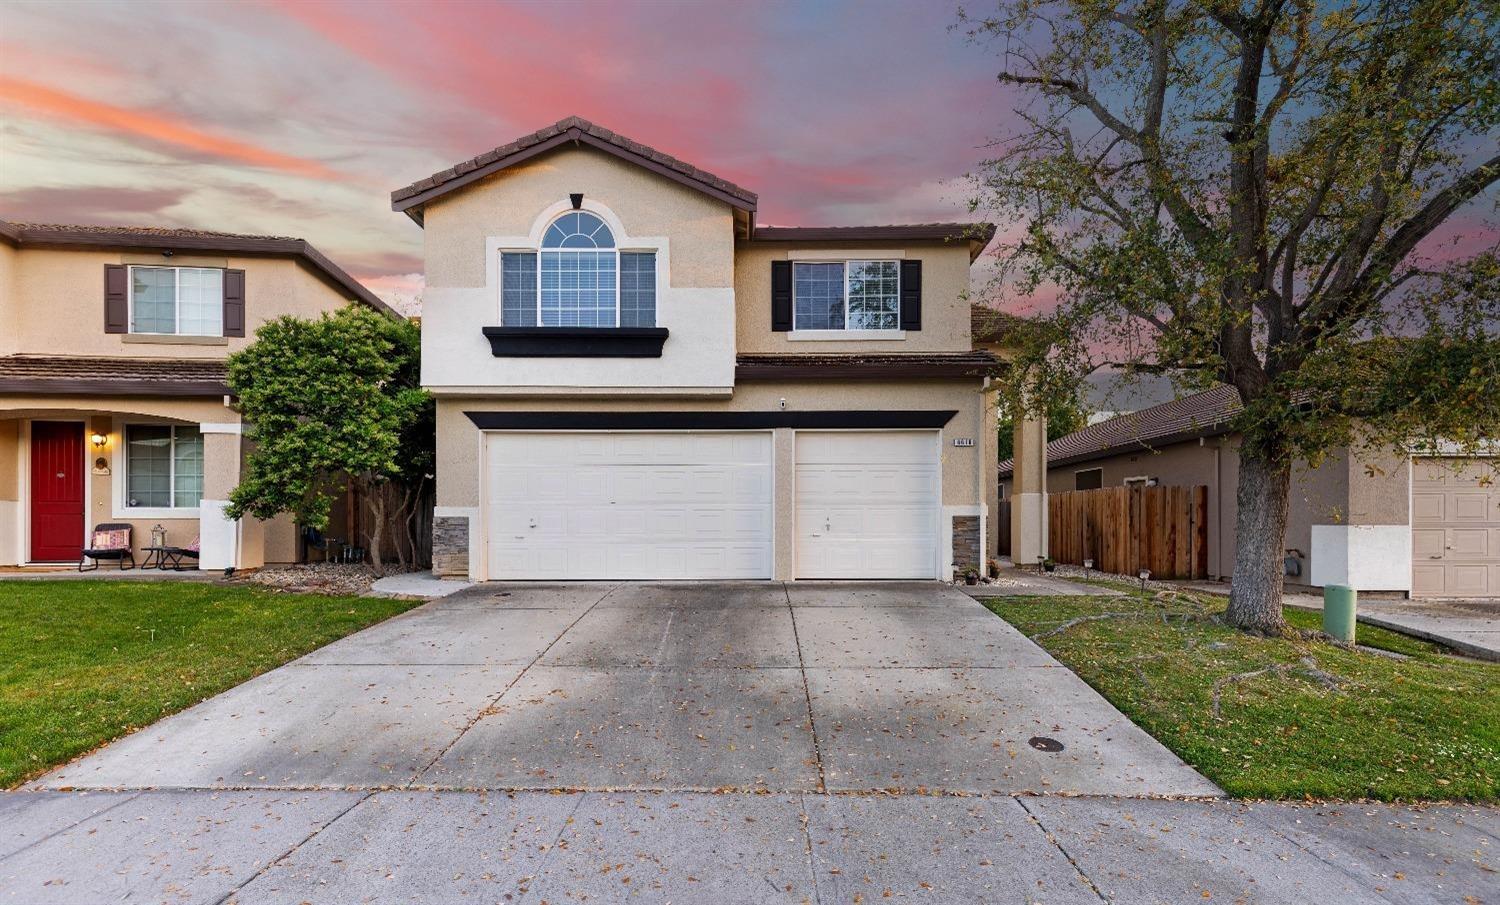 Photo of 6616 Trailride Wy in Citrus Heights, CA